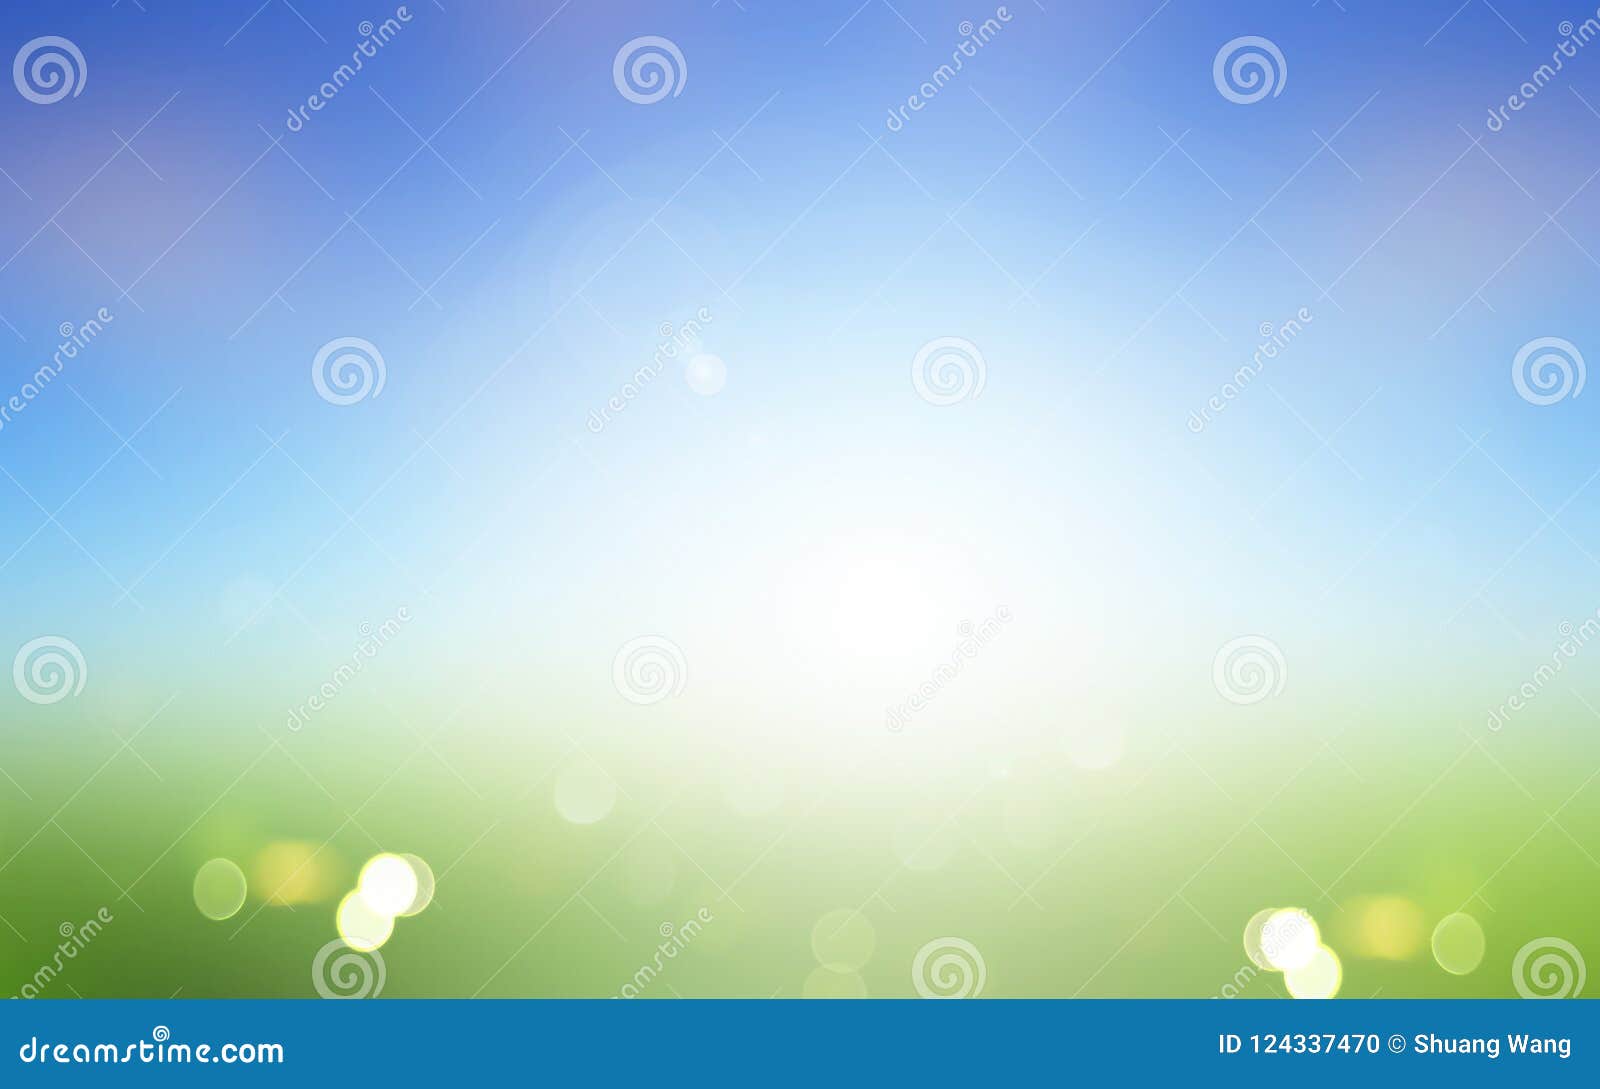 World Environment Day Concept Stock Photo - Image of evening, dramatic:  124337470